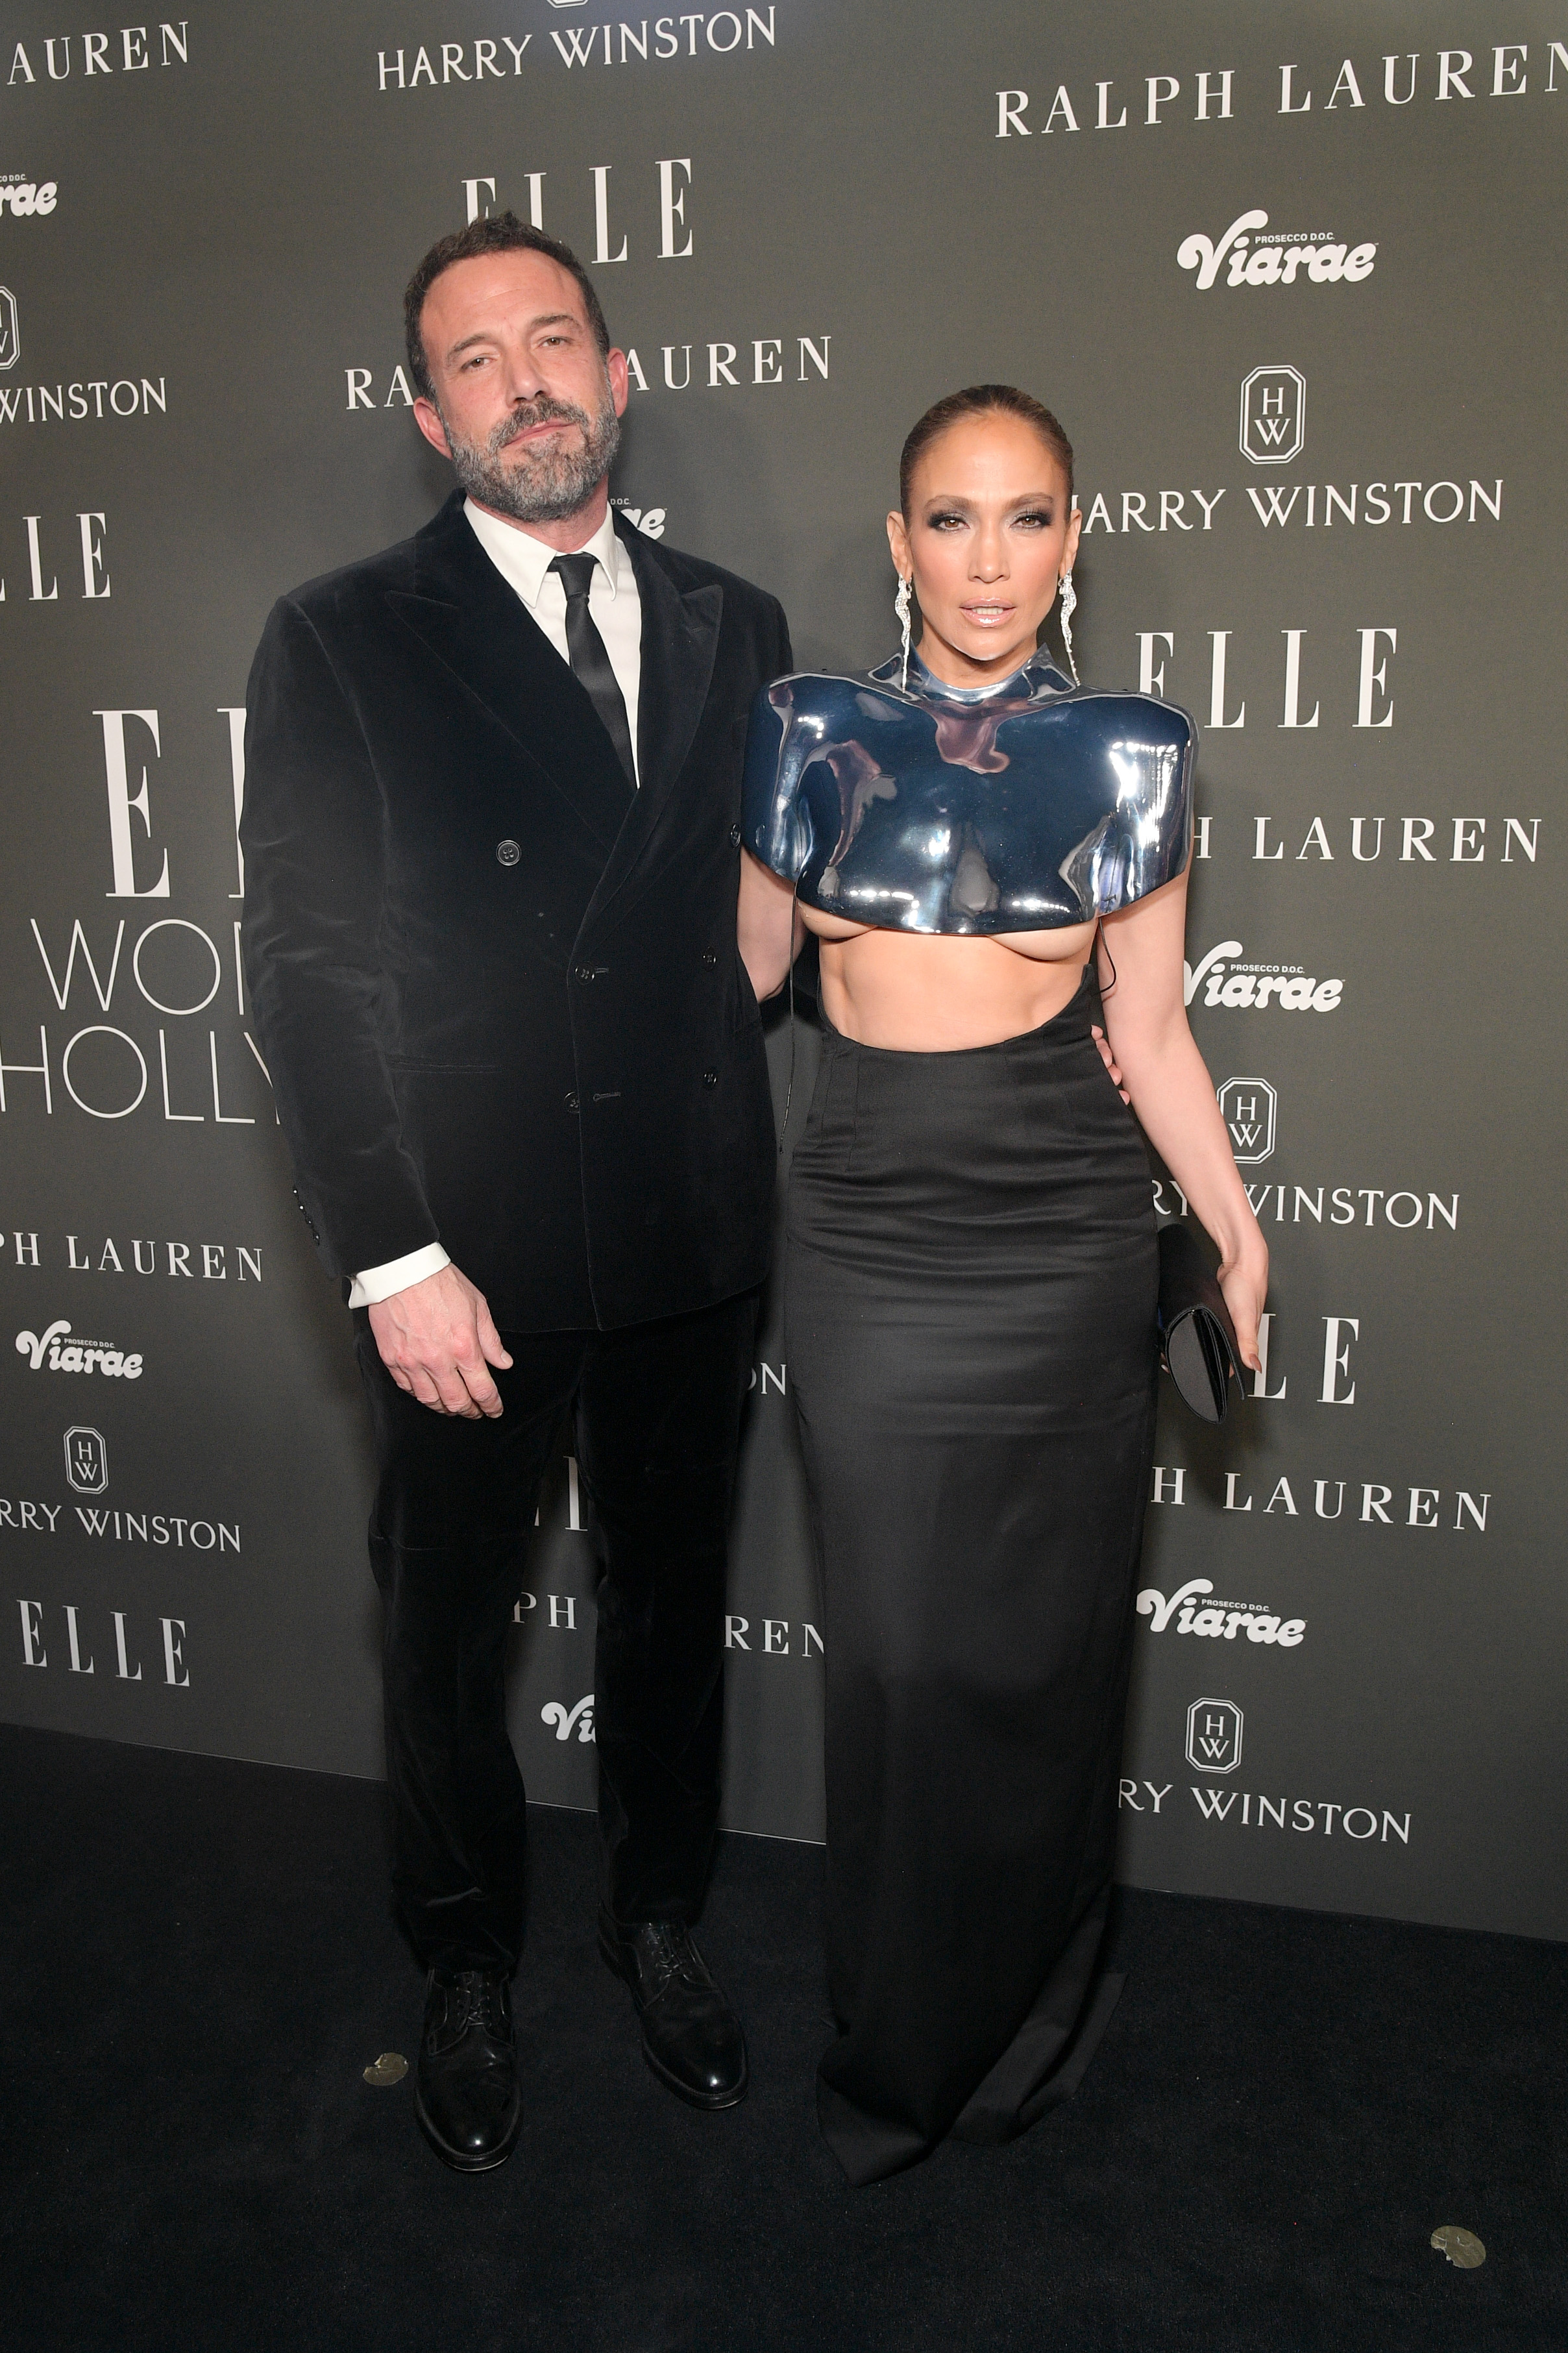 Ben Affleck and Jennifer Lopez attend ELLE's 2023 Women in Hollywood Celebration Presented by Ralph Lauren, Harry Winston and Viarae at Nya Studios on December 05, 2023 in Los Angeles, California | Source: Getty Images